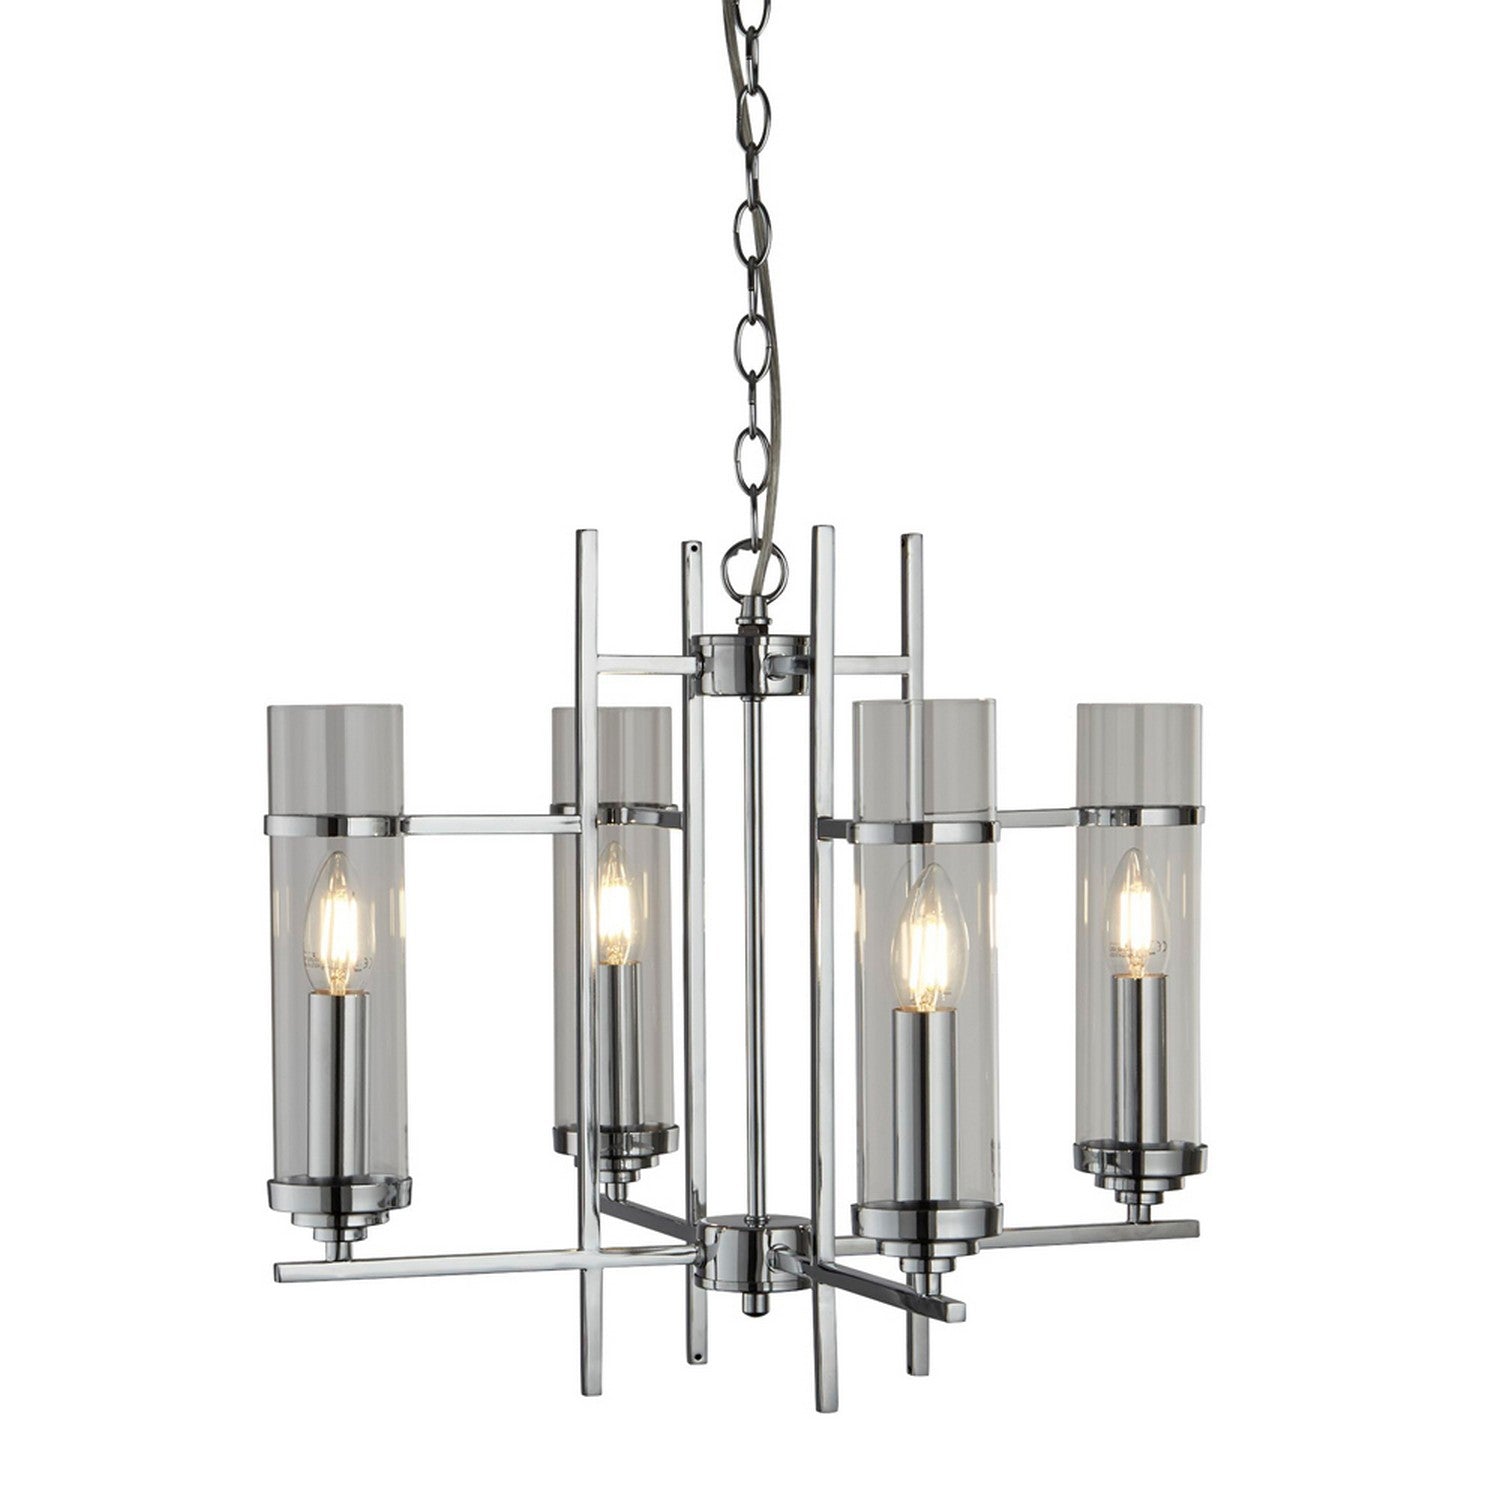 4 Light Chrome Clear Glass Cylinder Shade Ceiling Pendant Chandelier